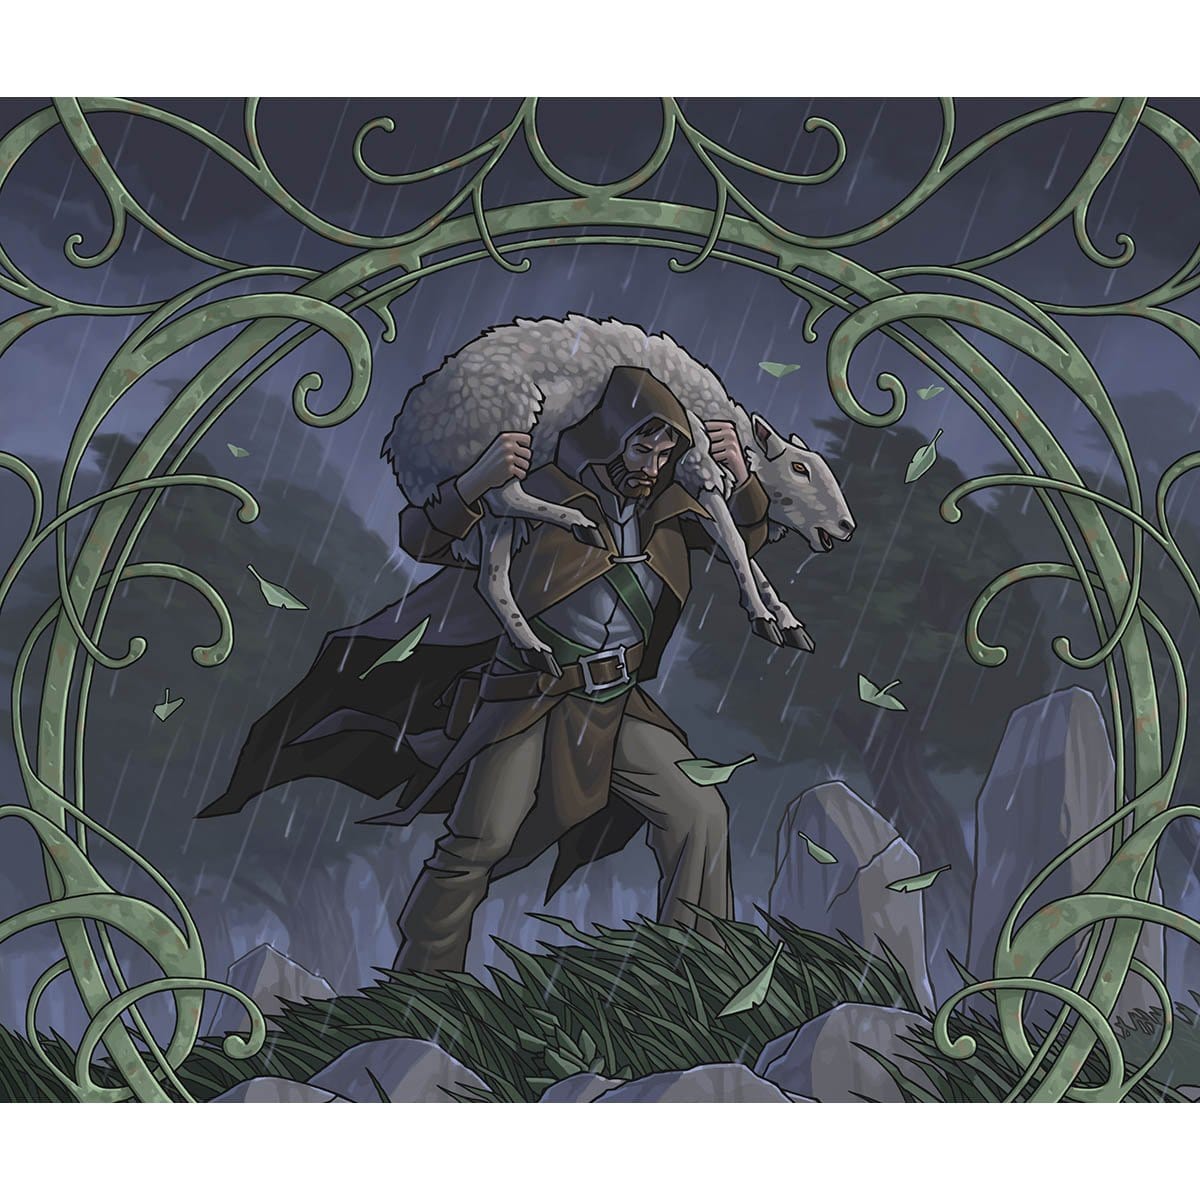 Shepherd of the Flock Print - Print - Original Magic Art - Accessories for Magic the Gathering and other card games